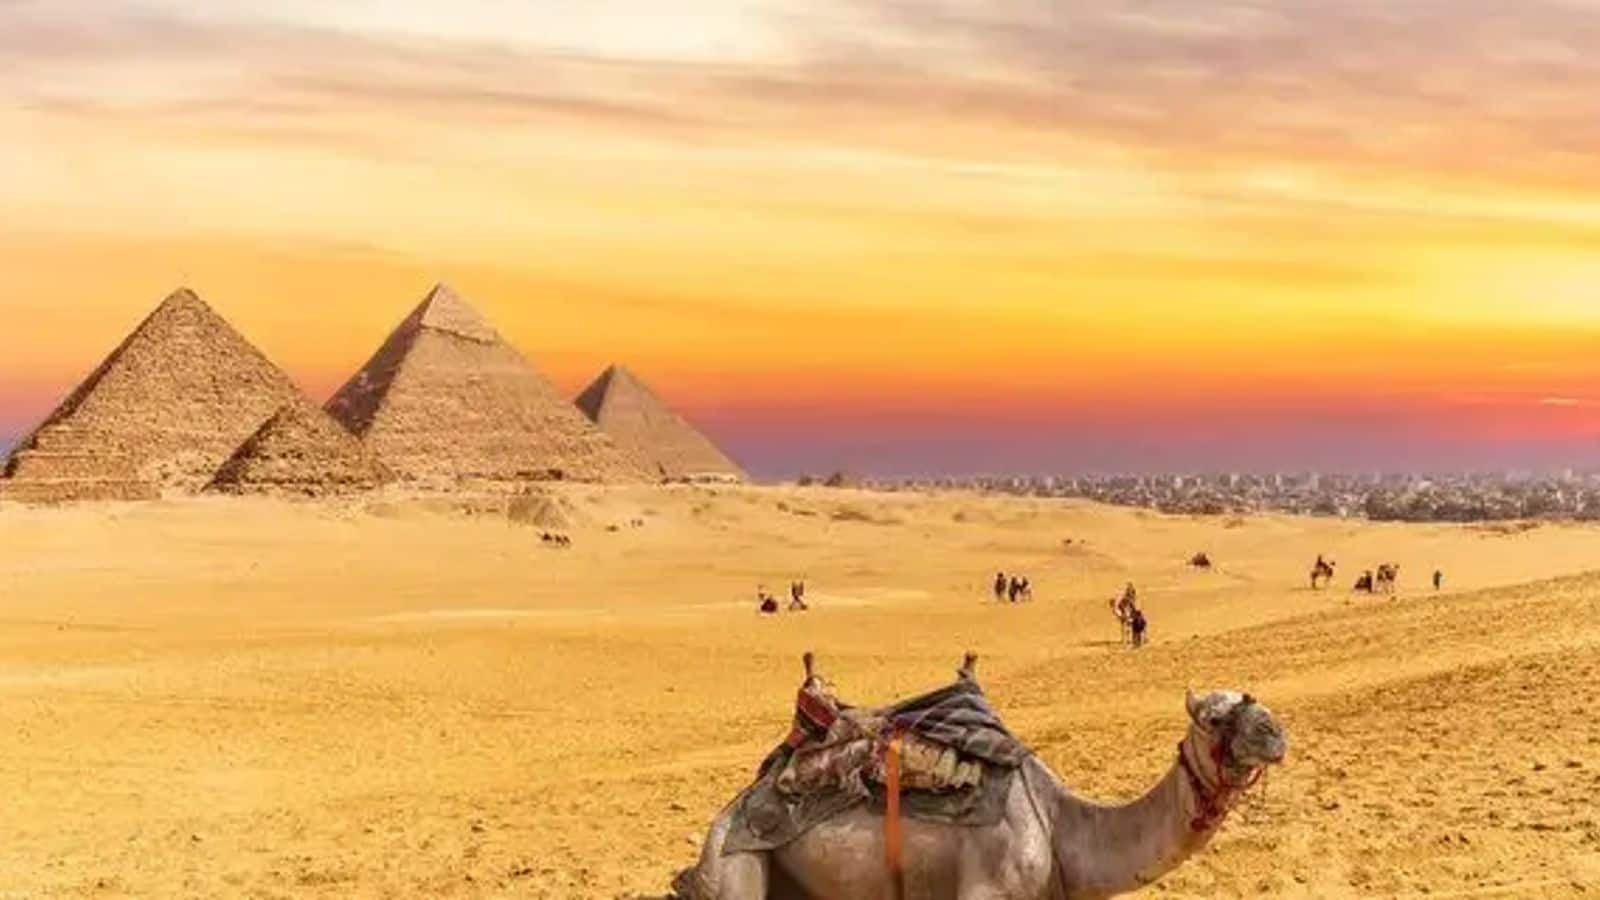 Add Cairo's ancient wonders to your itinerary